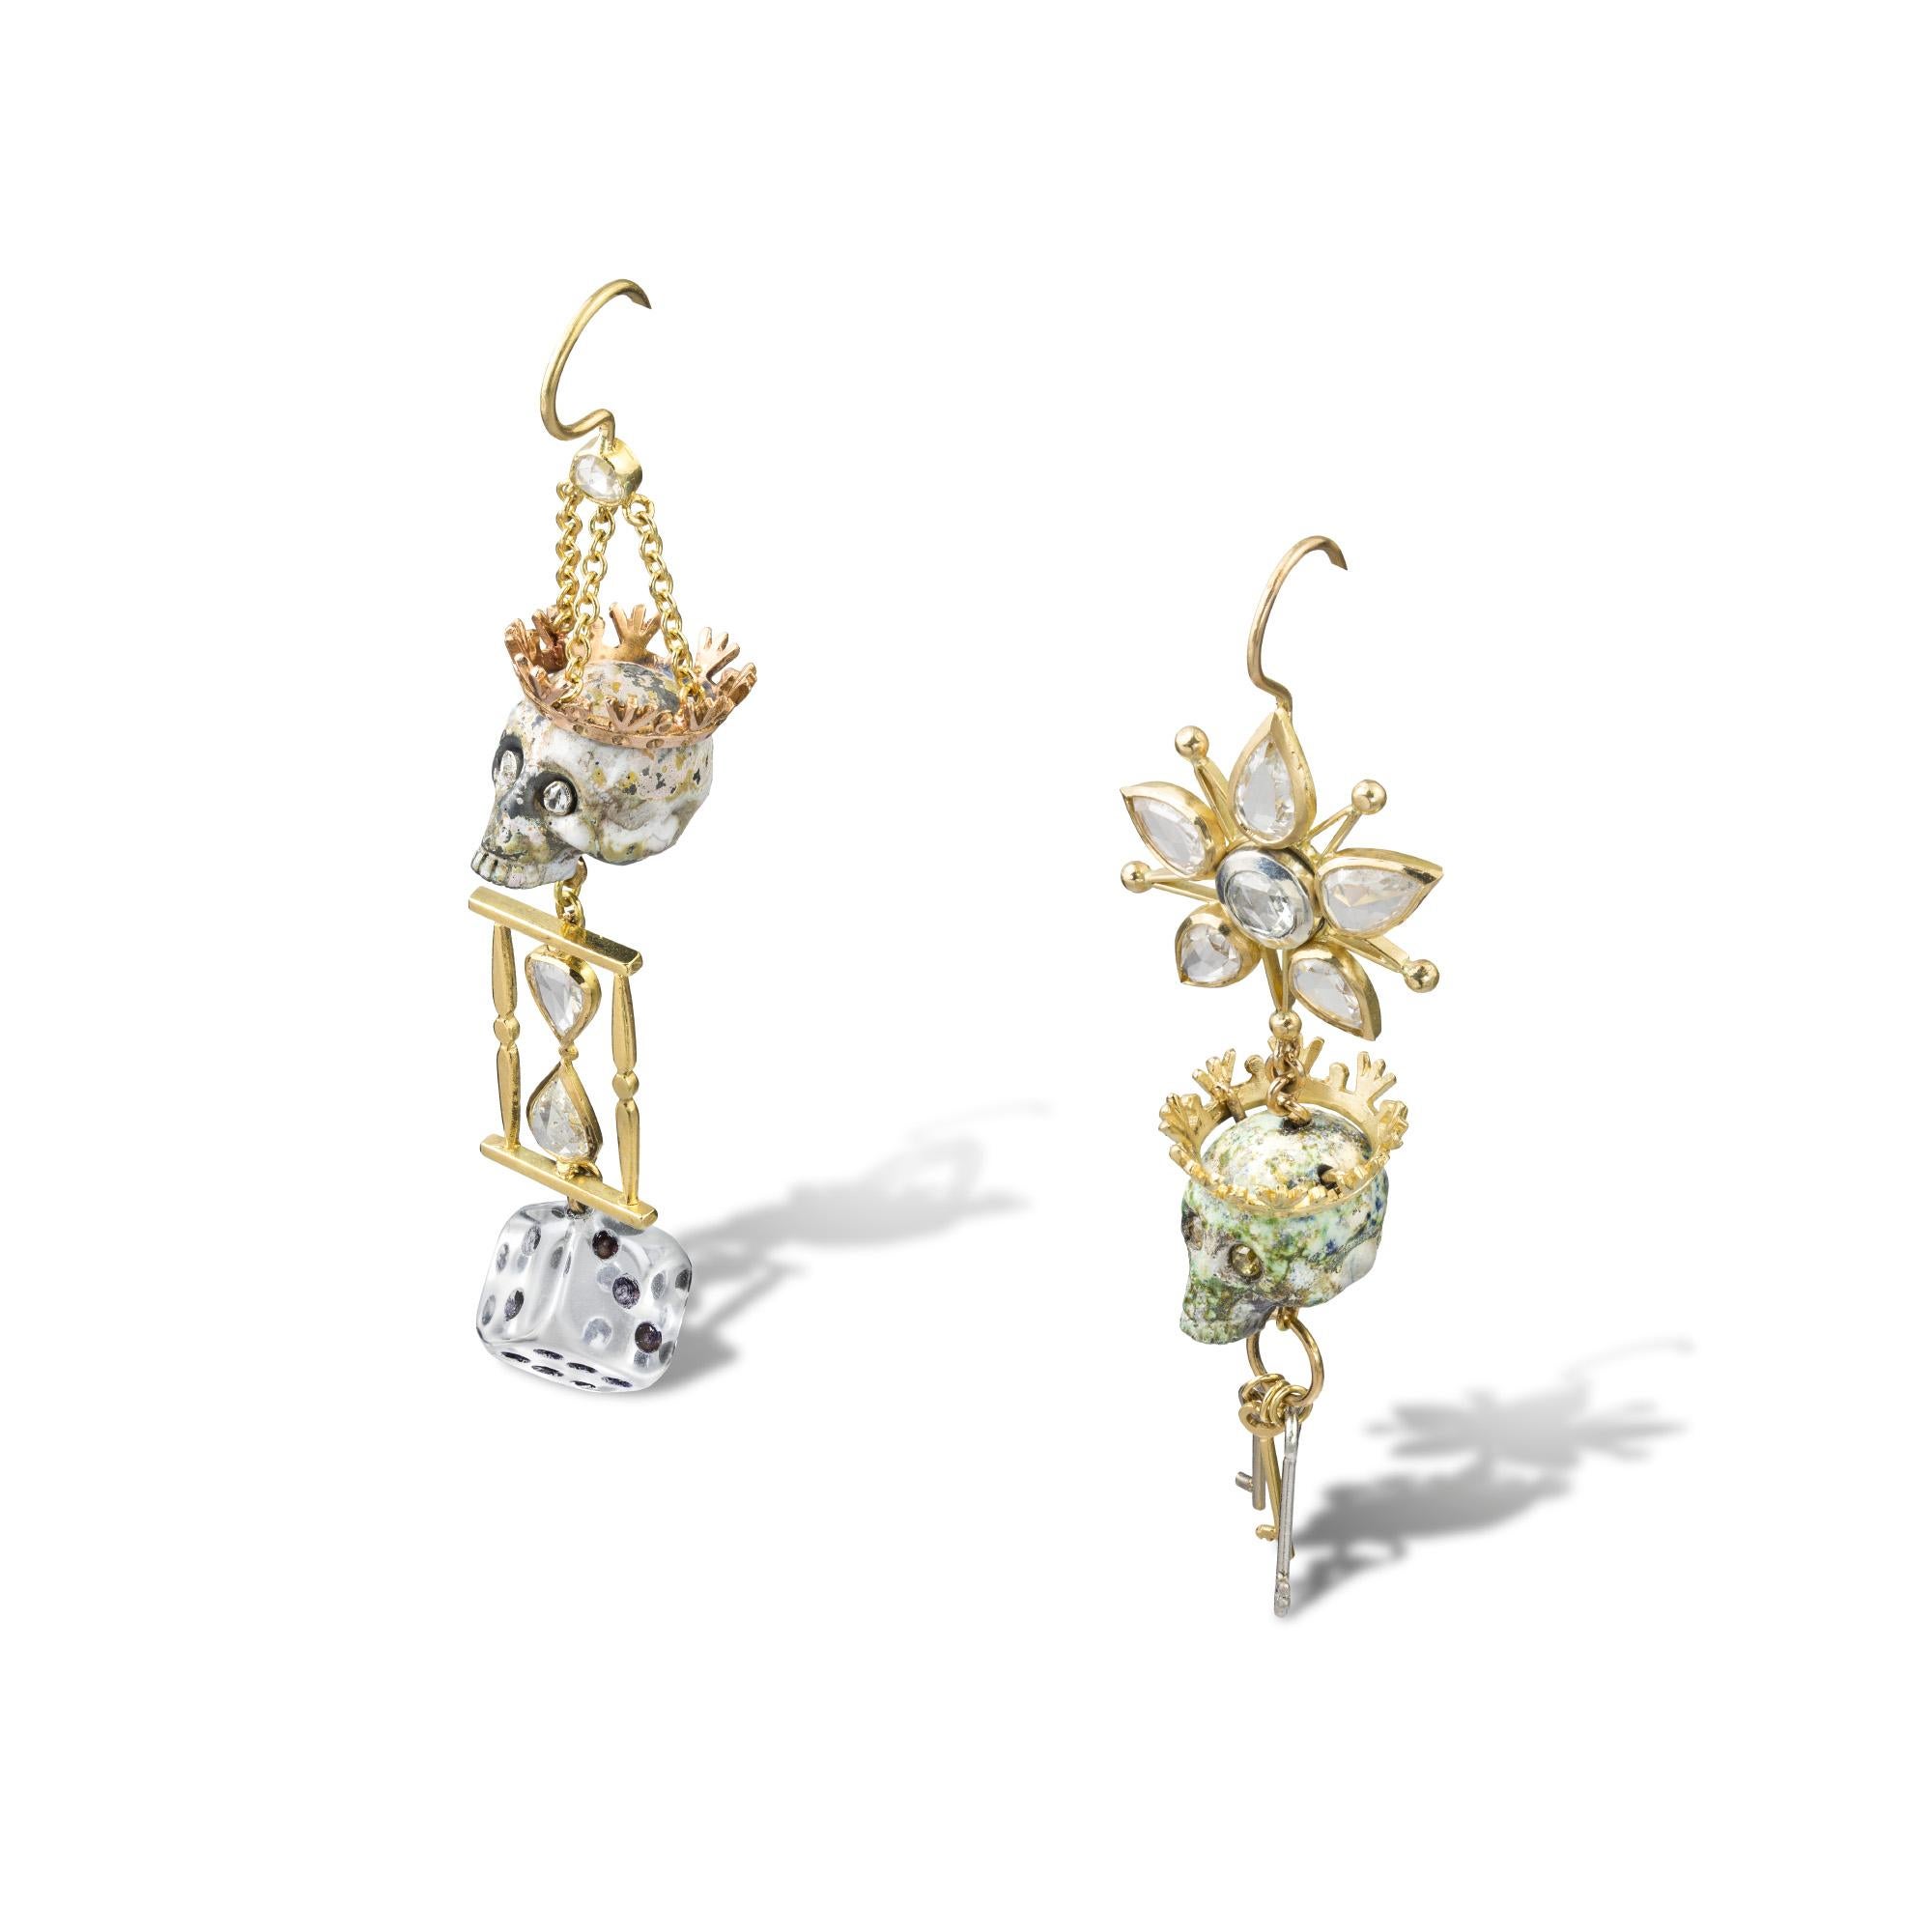 A pair of diamond and enamel skull earrings, the first earring set with a floral top of five pear shape diamonds suspending a crowned enamel skull in patchy green and white enamel with diamond-set eyes leading to three keys graduated in size in